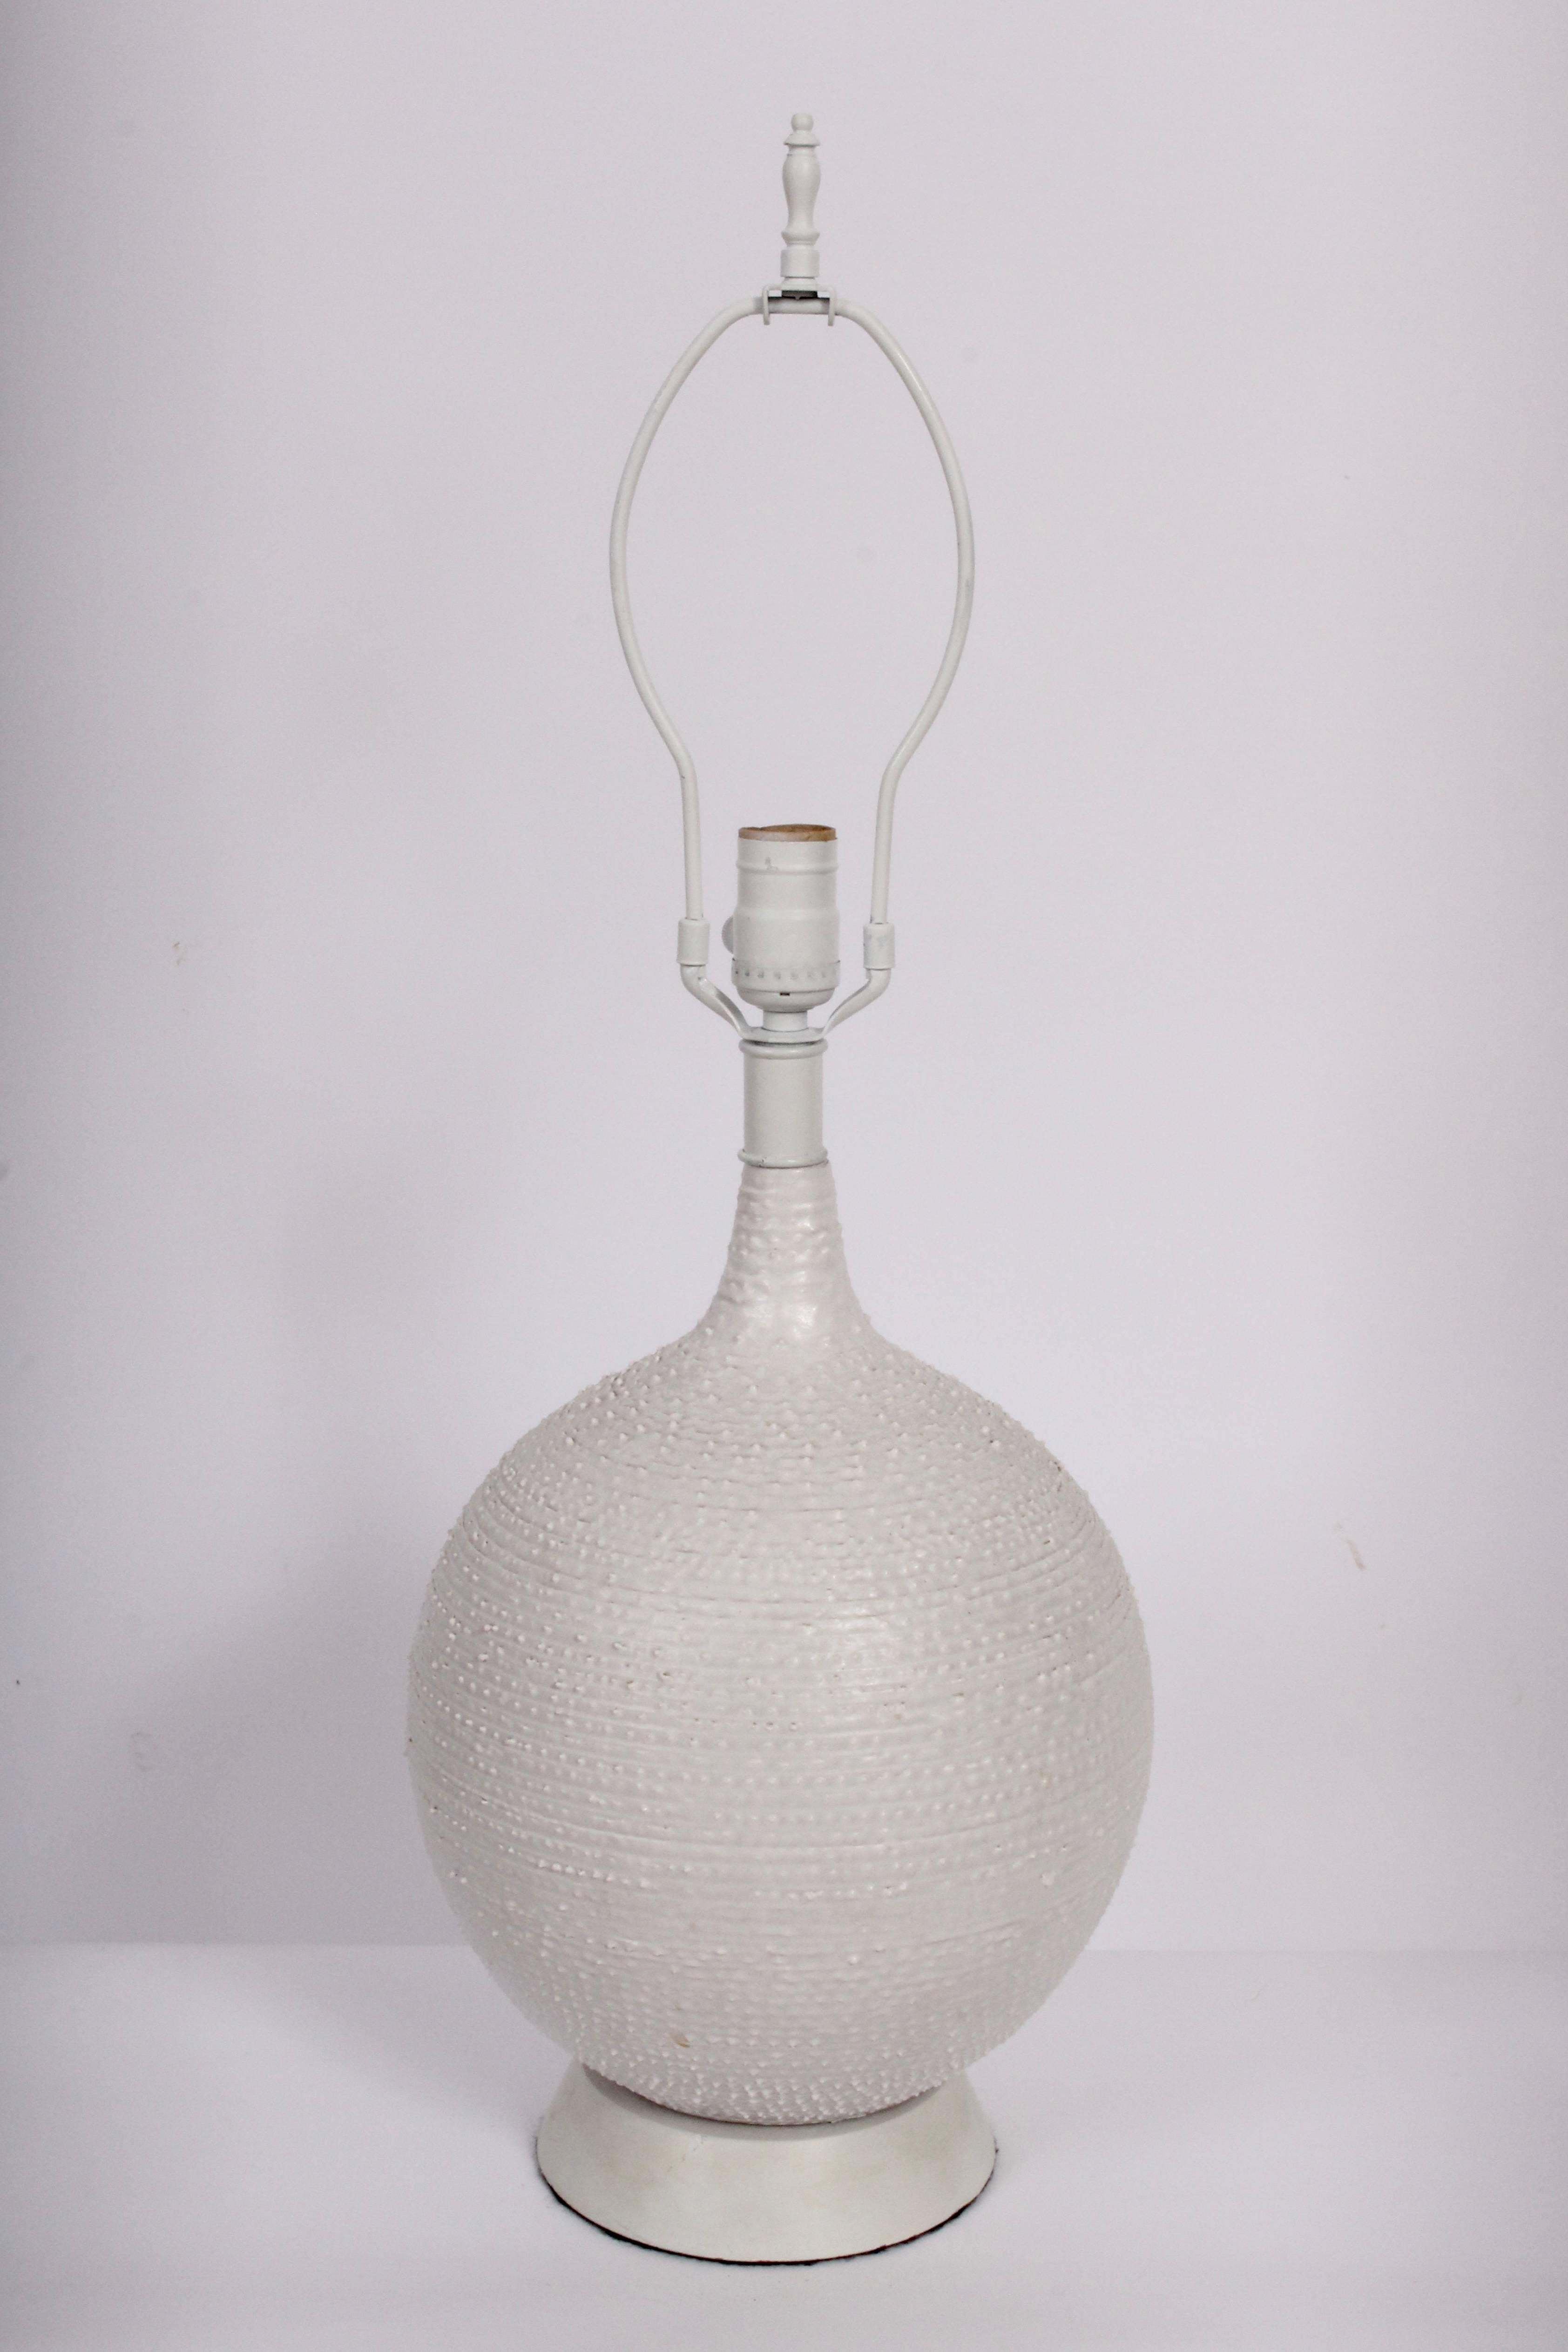 American Mid Century Design-Technics Handcrafted White Pottery Table Lamp. Featuring a substantial textured off white bulbous form with satin glaze. Shade shown for display only and not for sale (9.25H x 12D top x 13D bottom). 19H to top of socket.